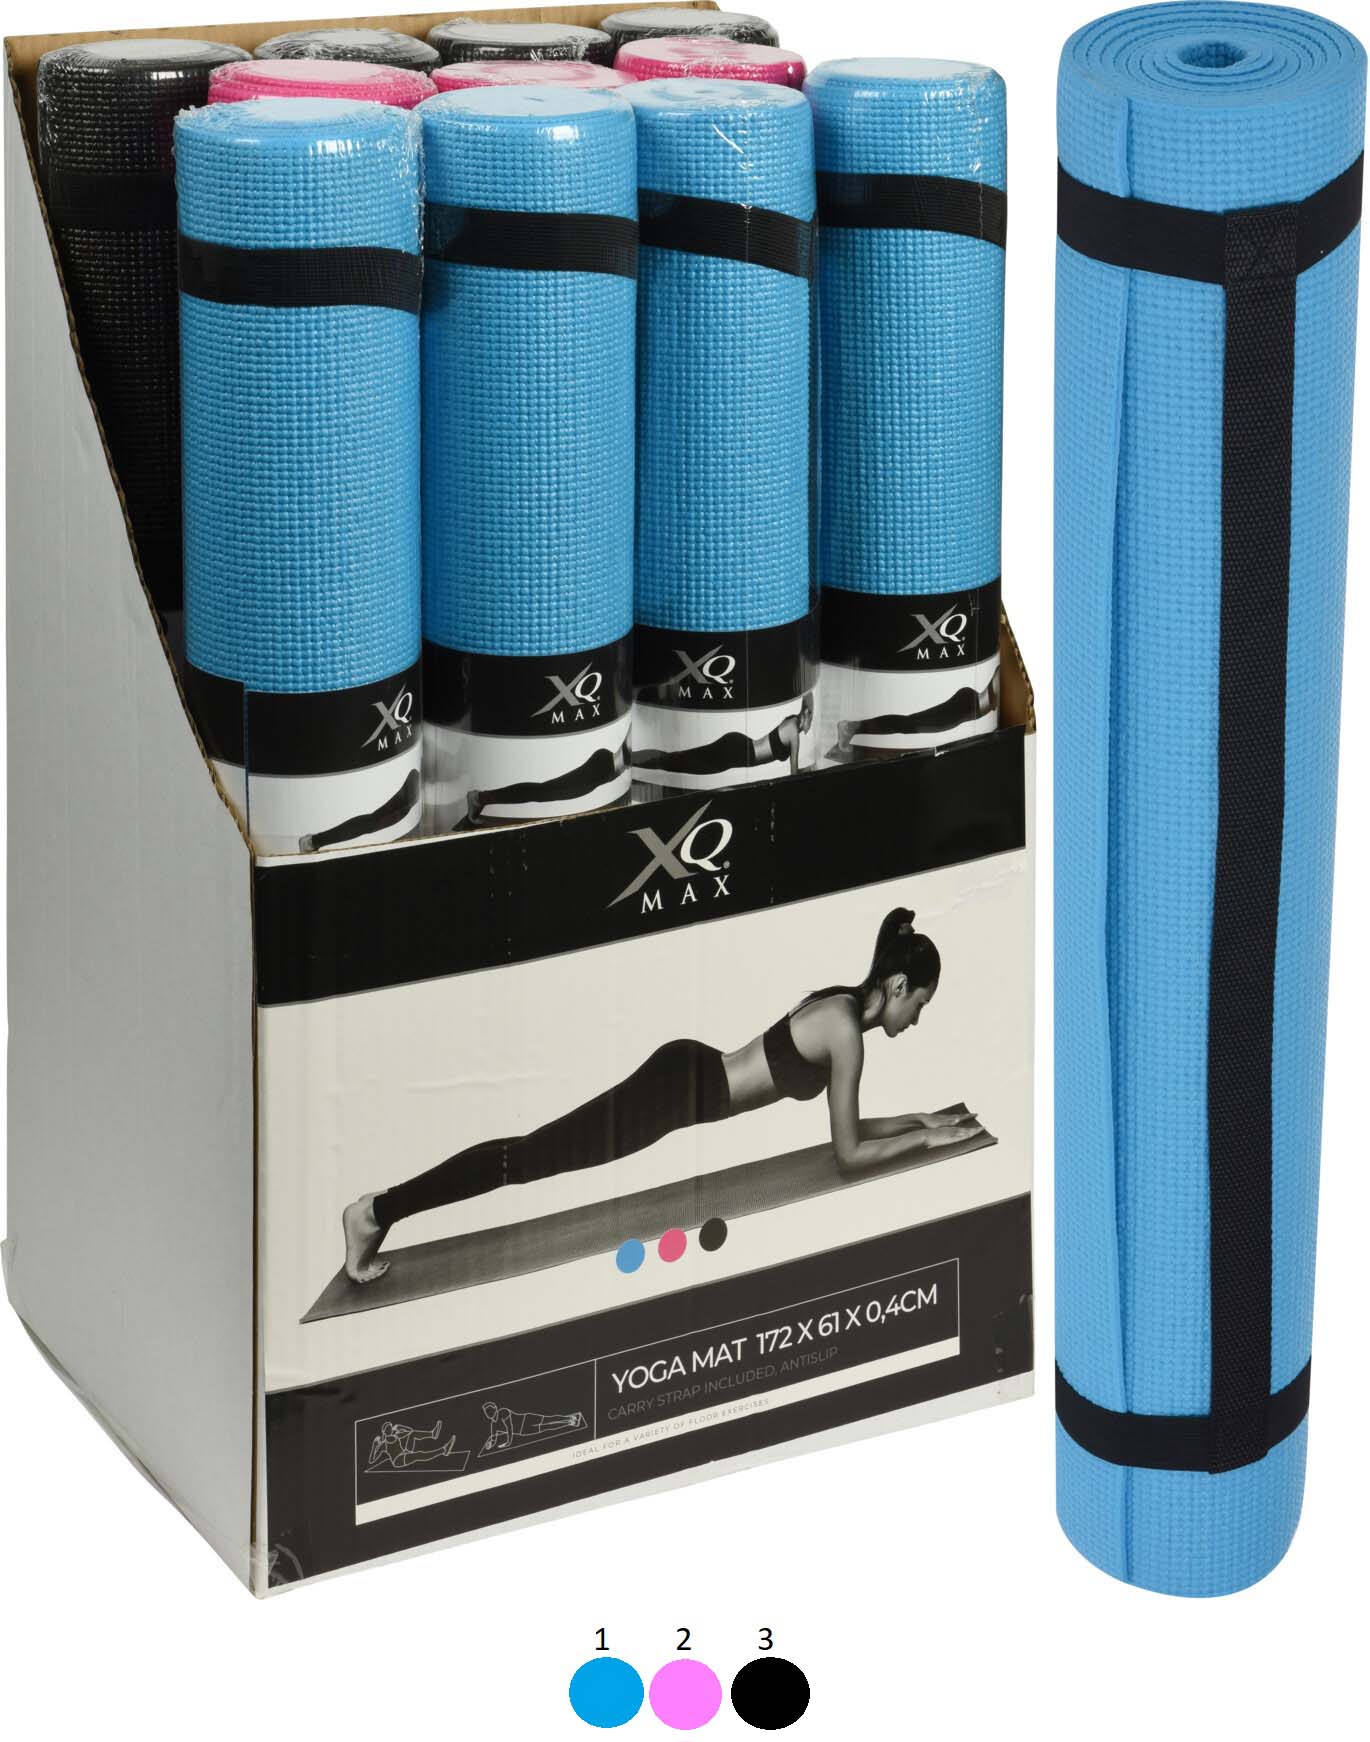 YOGAMAT PV 3 ASSORTED COLORS